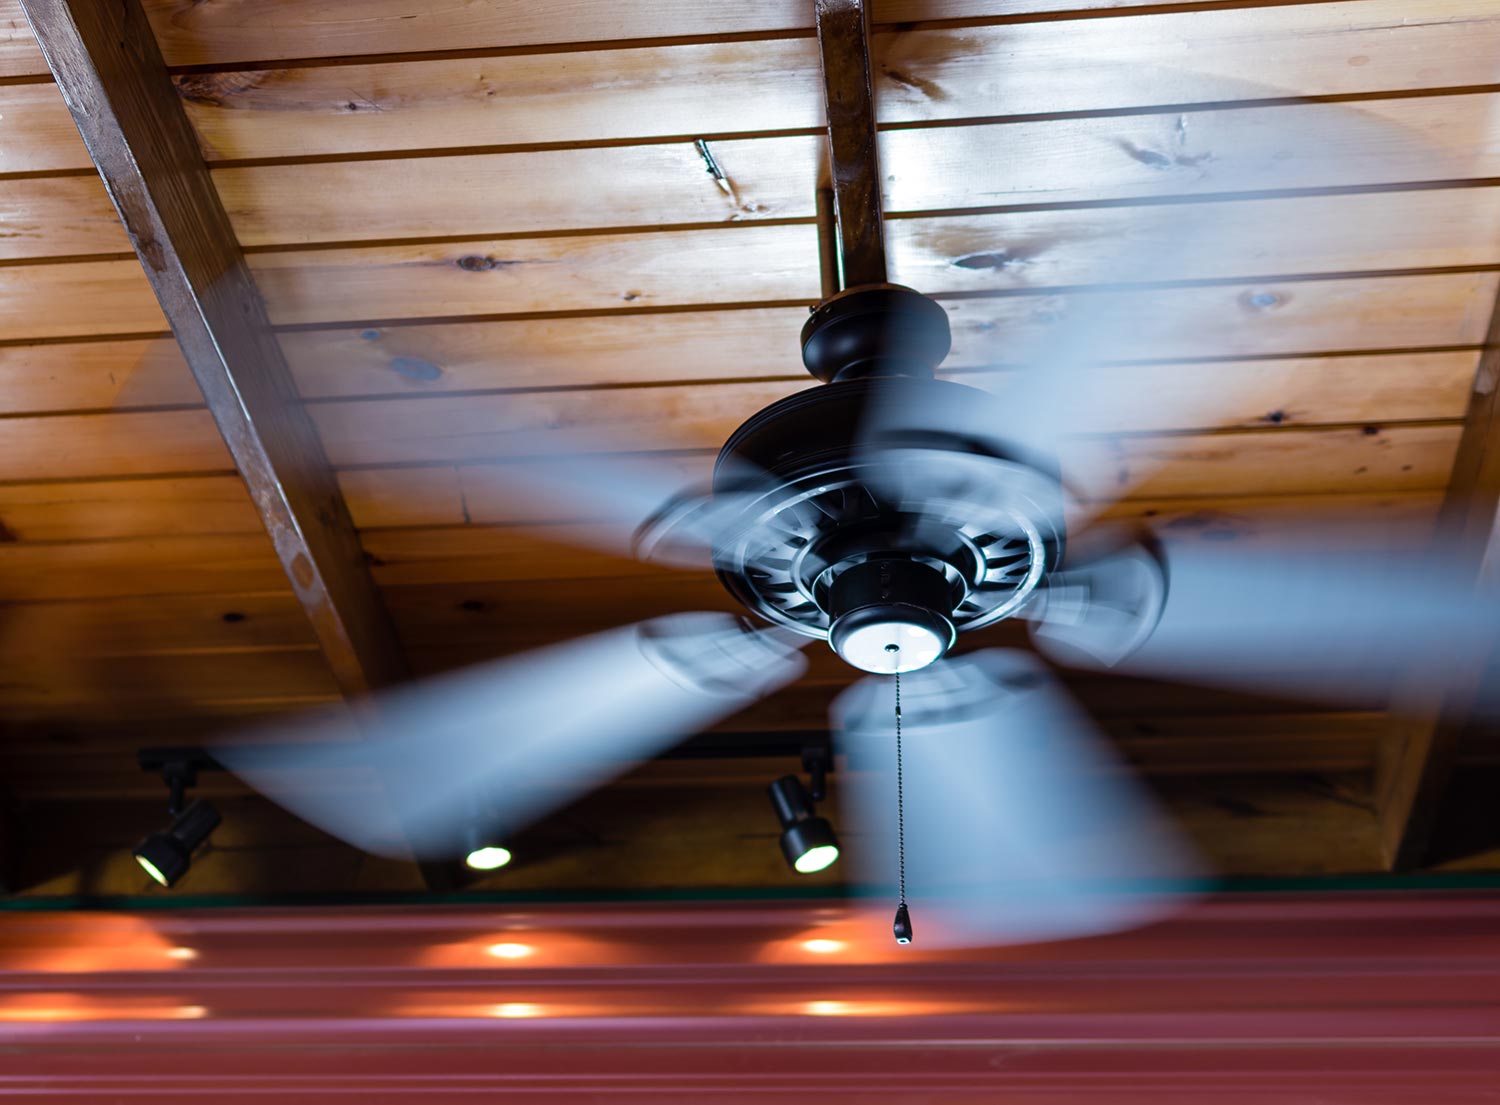 Ceiling fan shows motion blur as its blades spin around